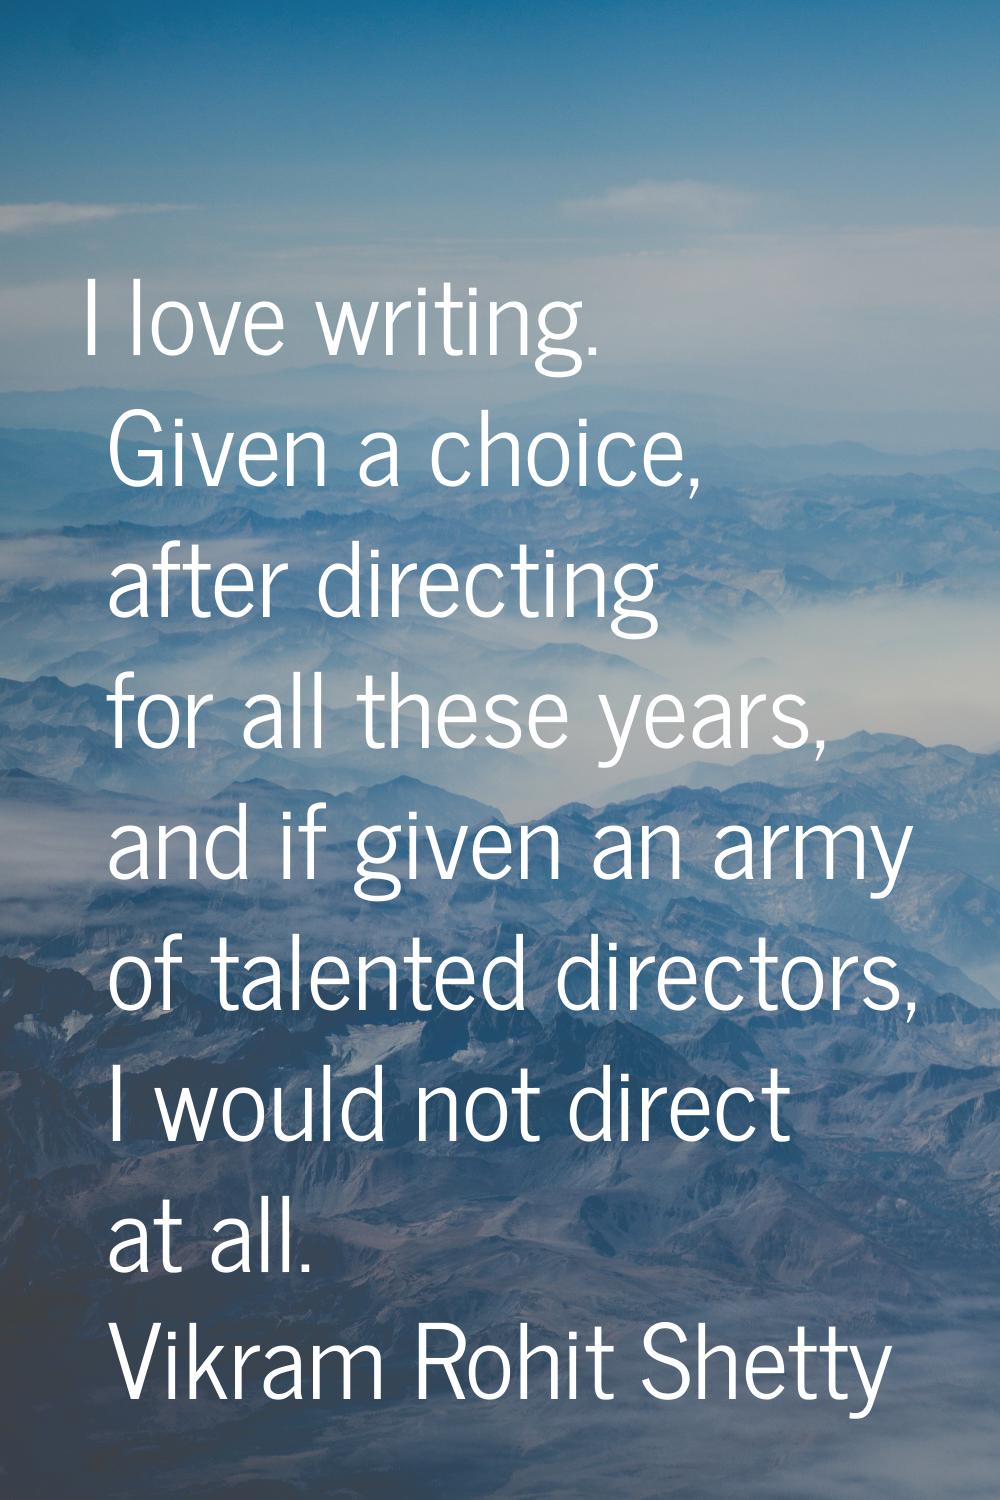 I love writing. Given a choice, after directing for all these years, and if given an army of talent